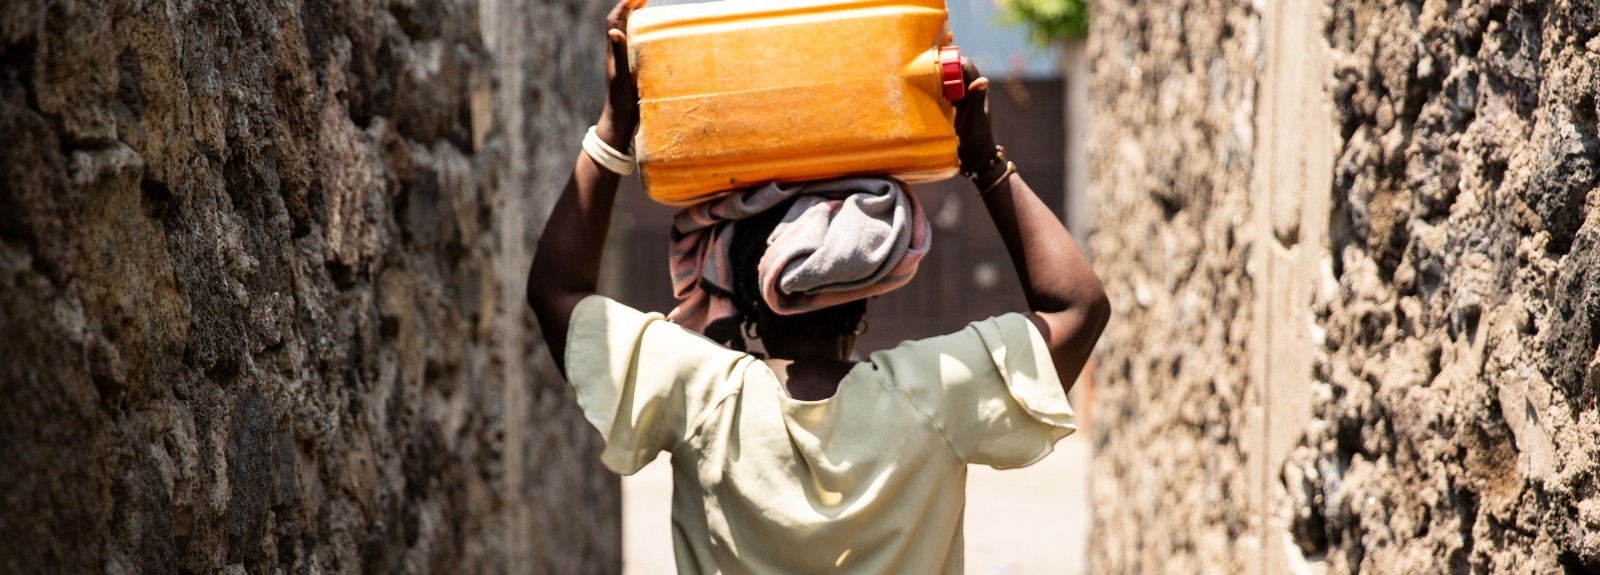 Improving global water, sanitation and hygiene access 